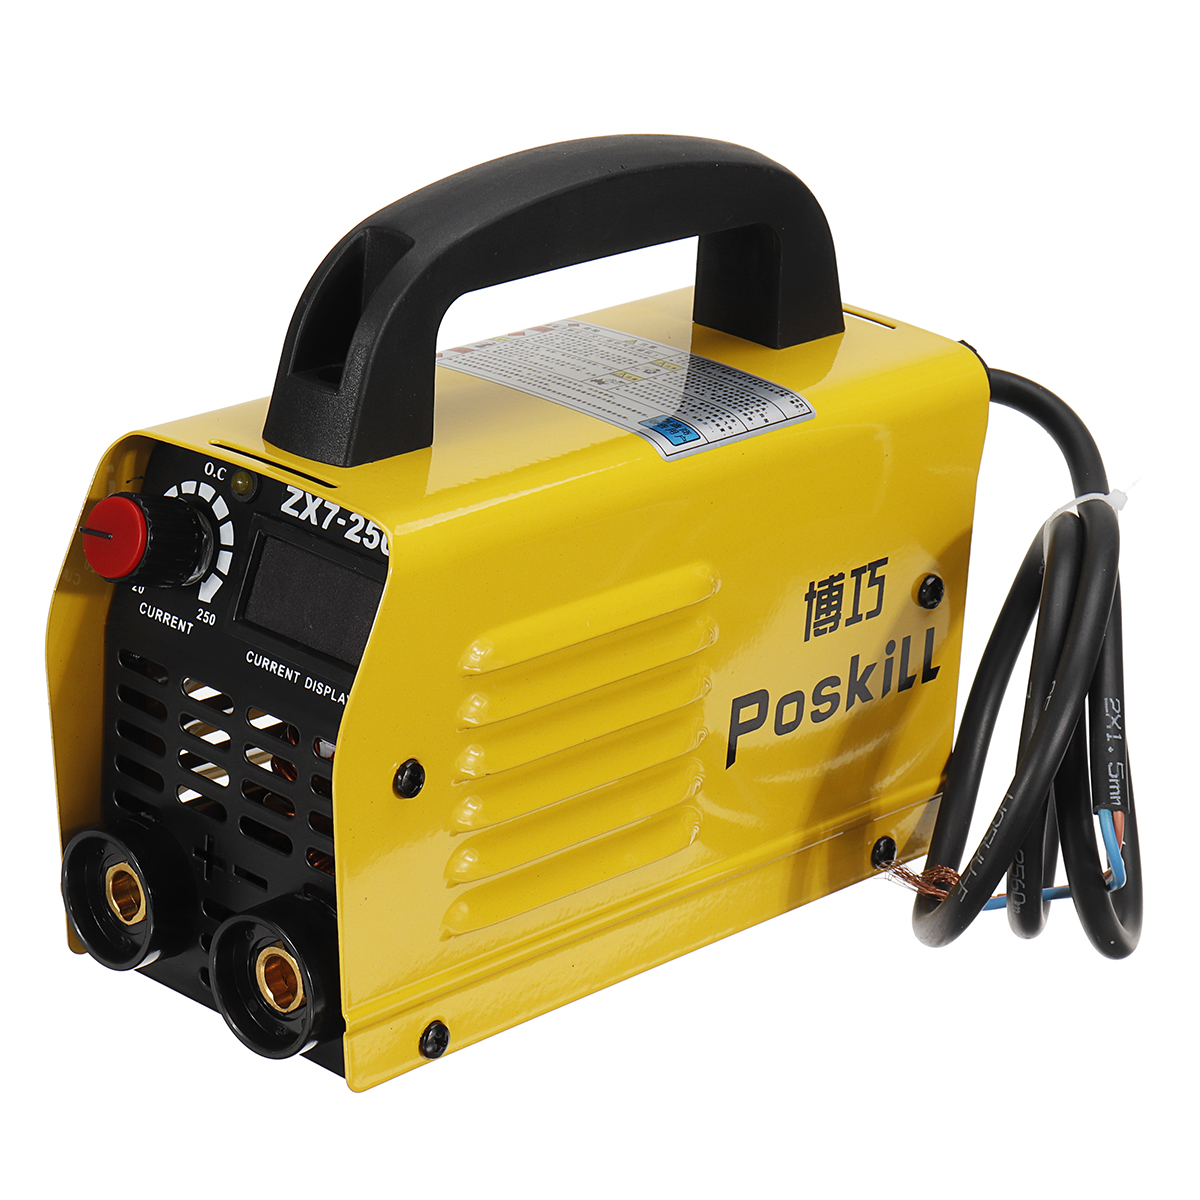 Find ZX7-250 4000W 200A 220V Mini DC Inverter Electric Welding Machine Welder for Stainless Steel Alloy for Sale on Gipsybee.com with cryptocurrencies